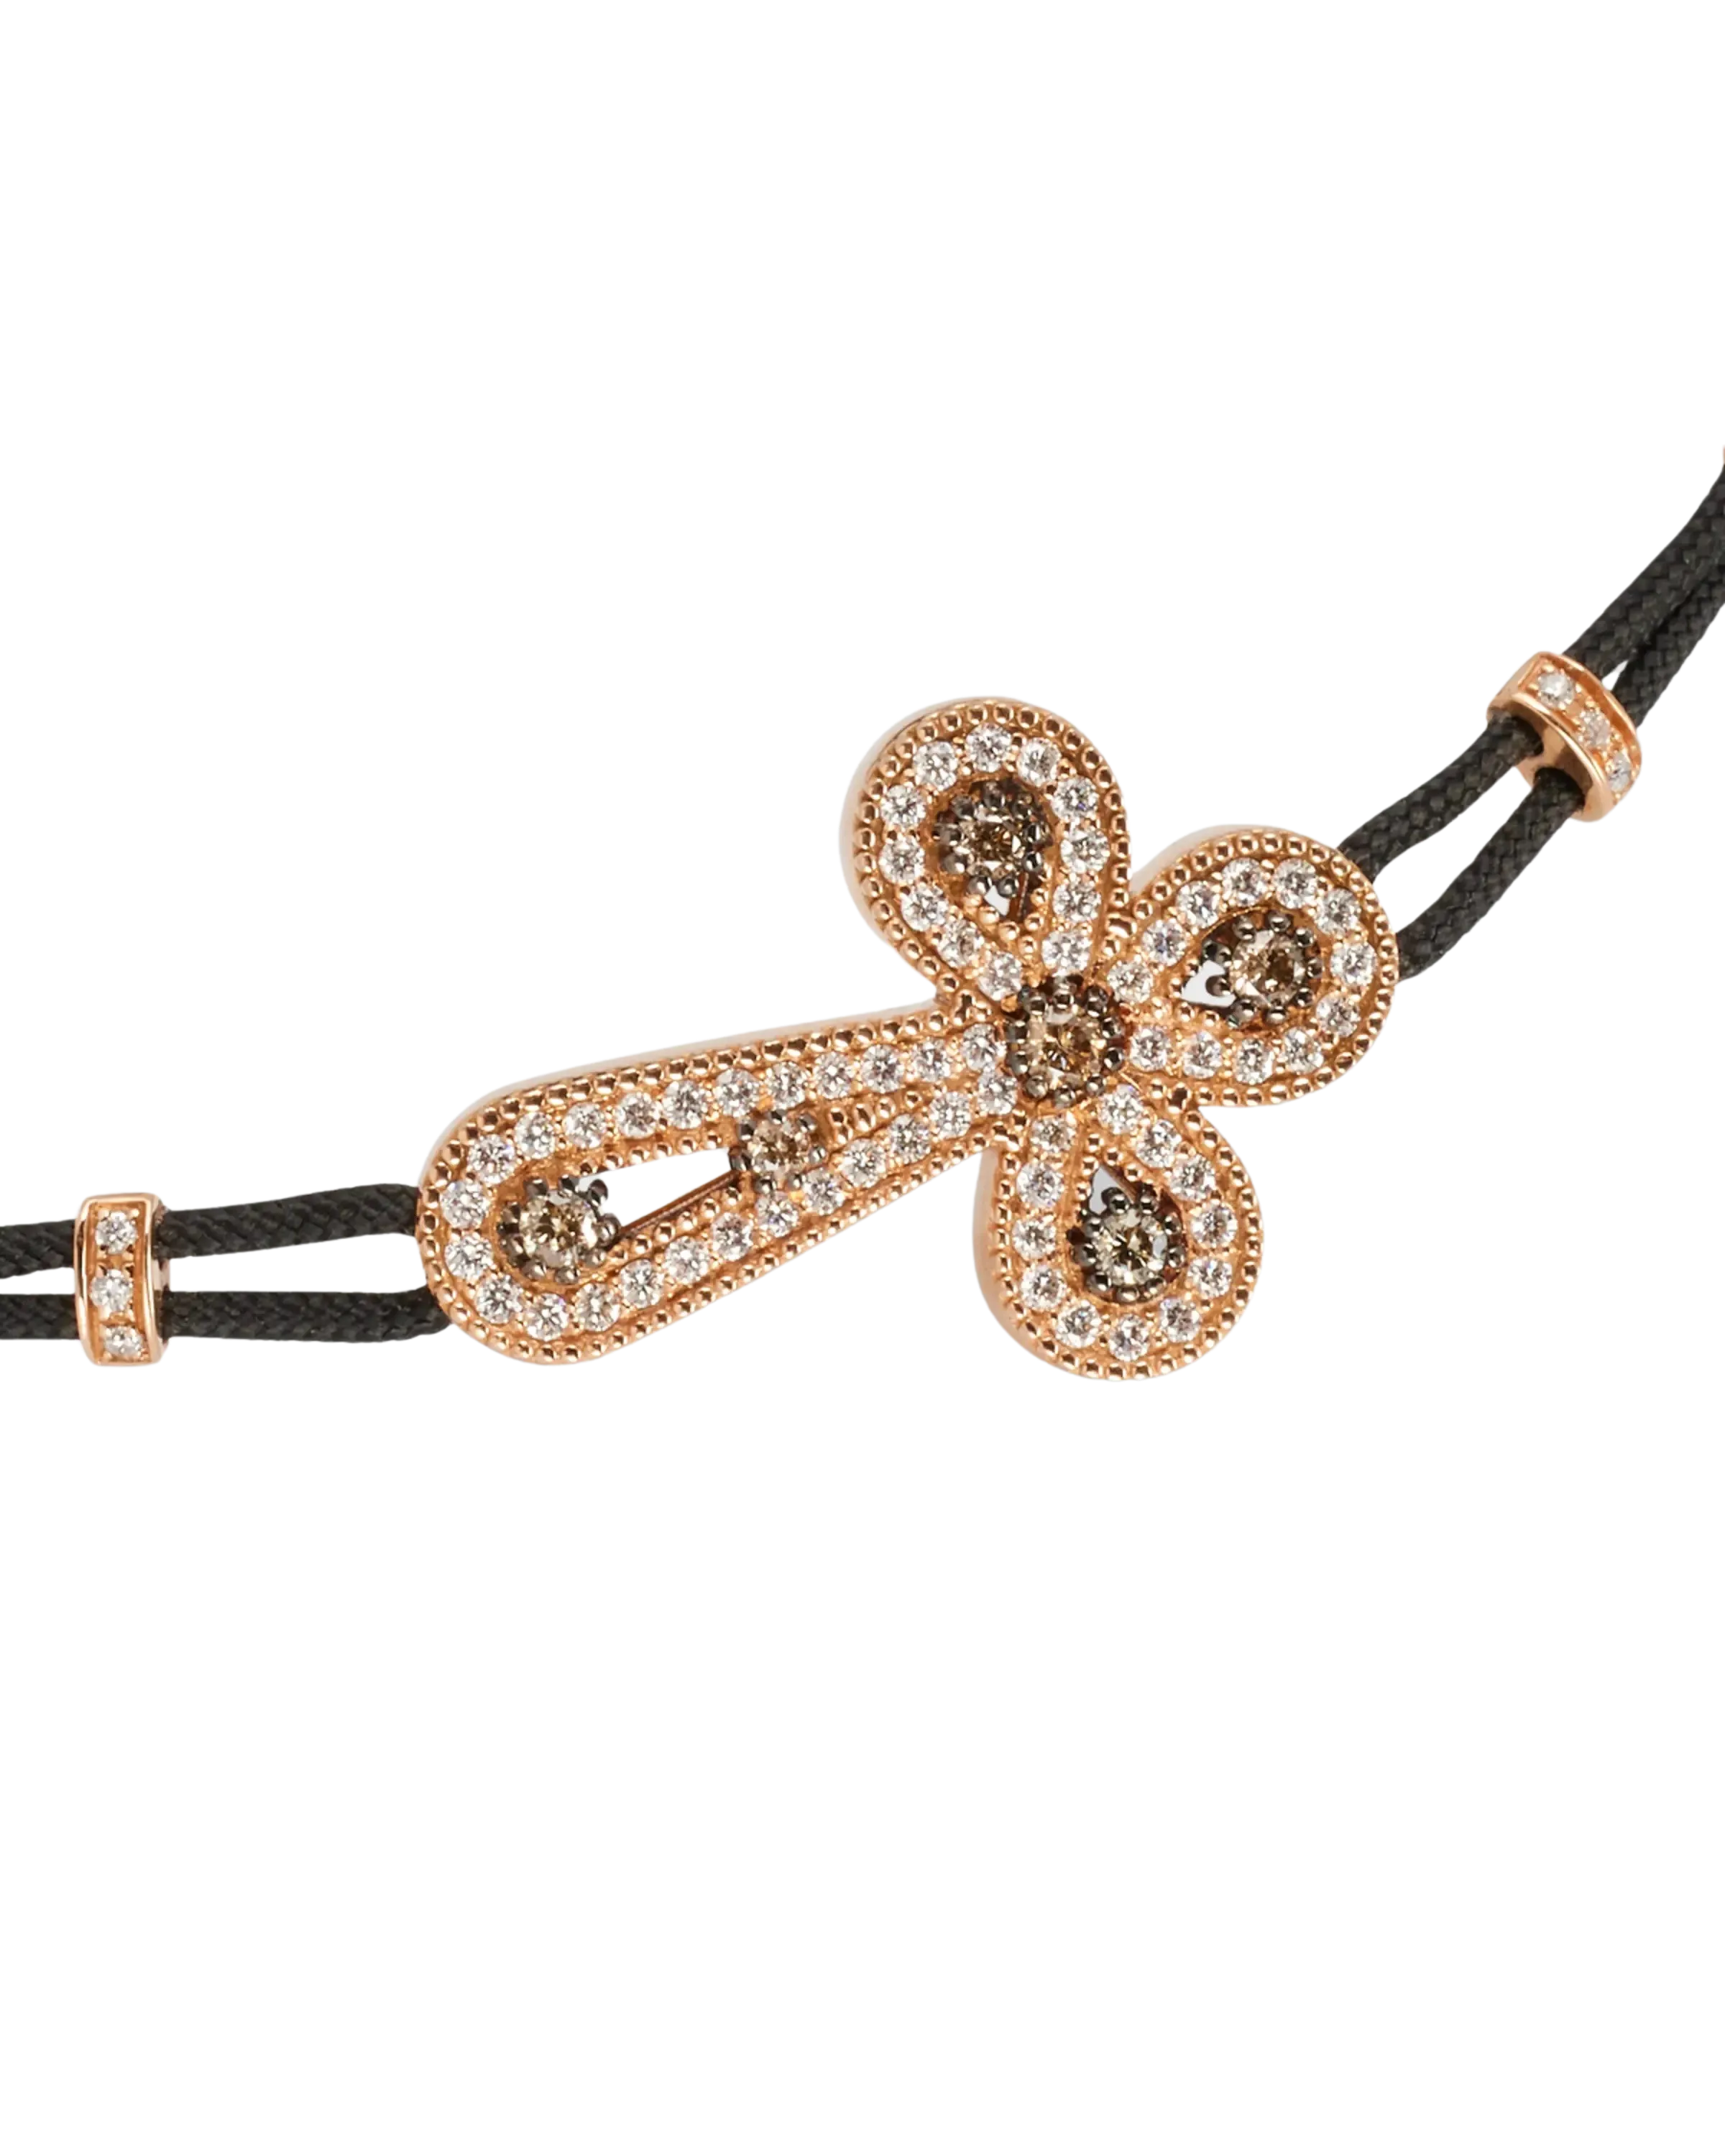 Criss White and Brown Diamond Pull-Cord Bracelet